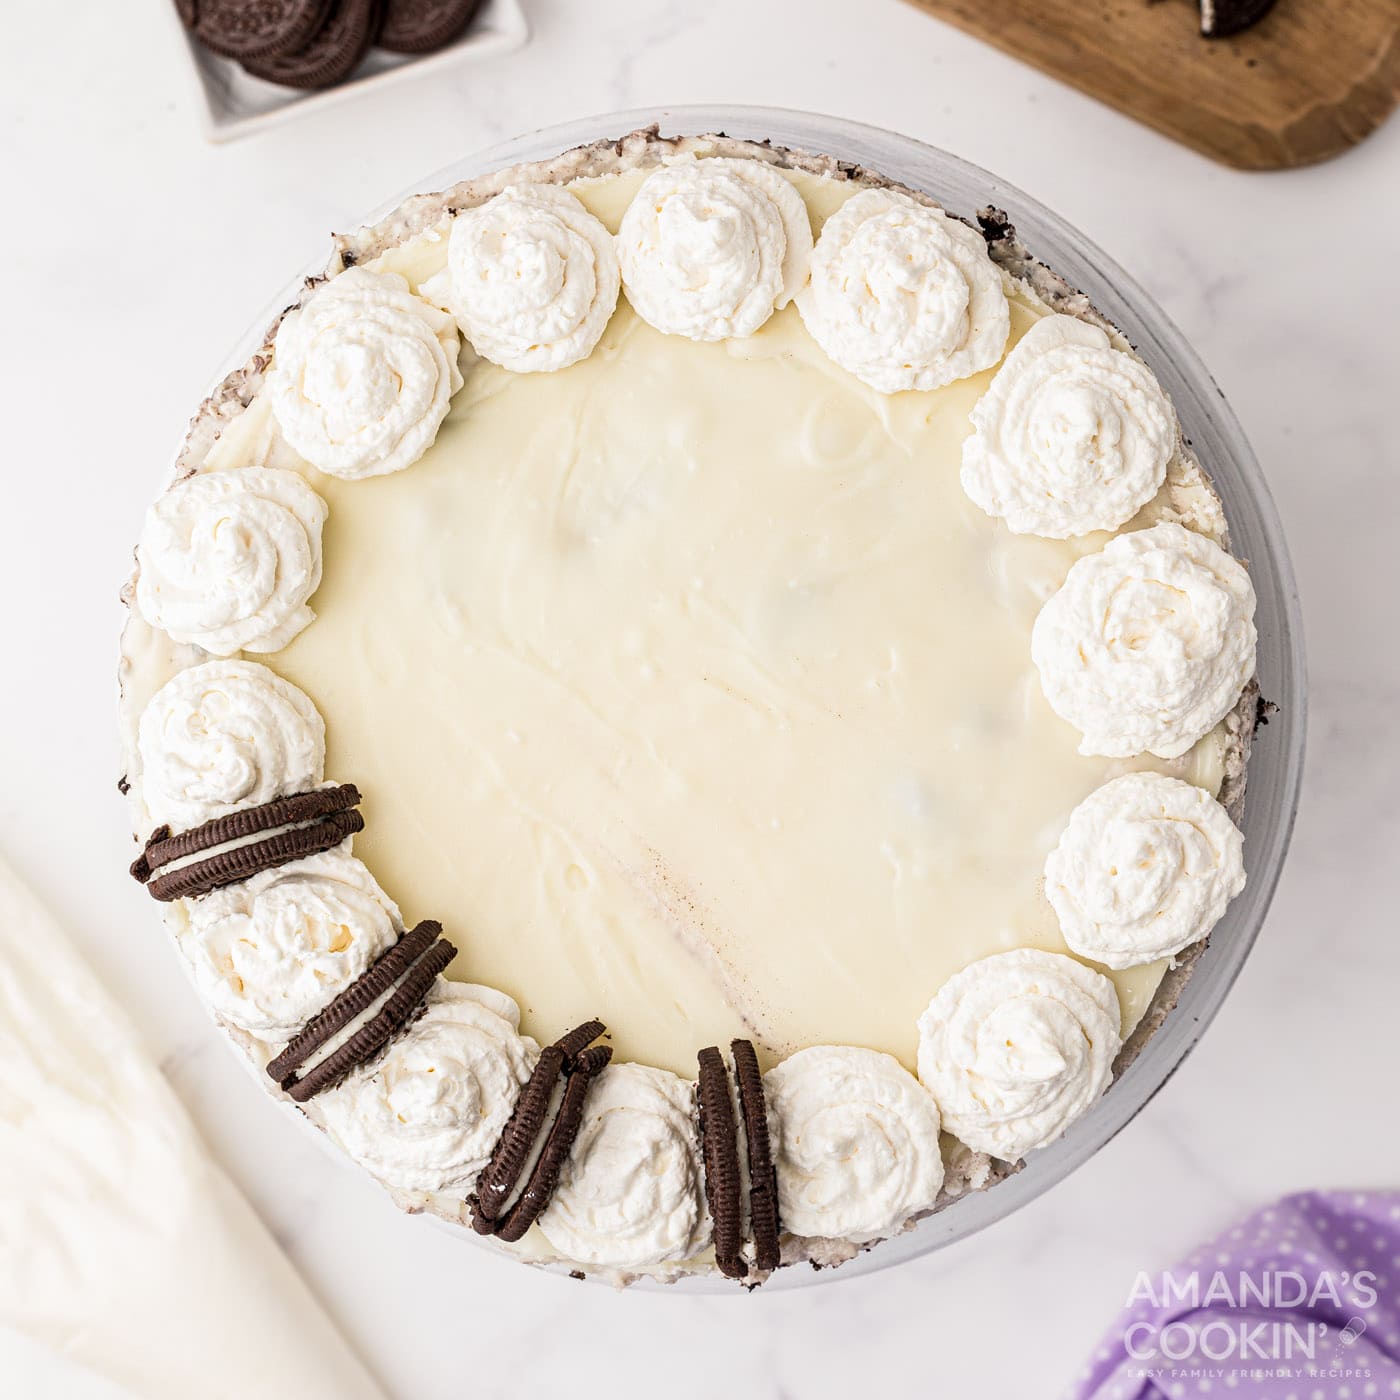 Oreo cookies in the middle of whipped cream swirls on cheesecake